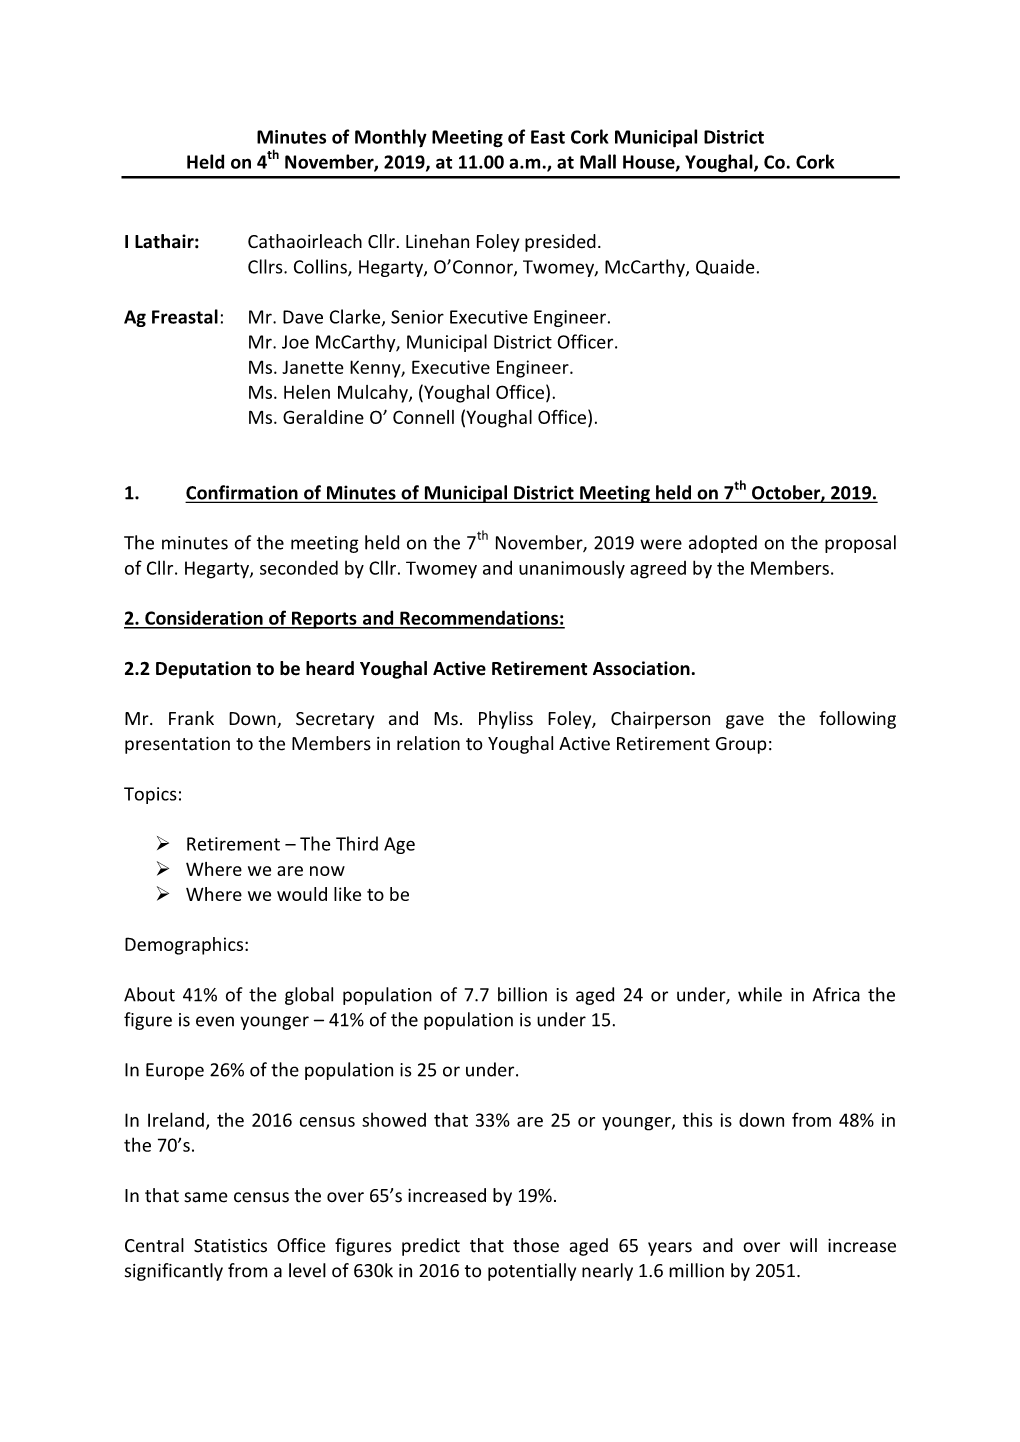 Minutes of Monthly Meeting of East Cork Municipal District Held on 4Th November, 2019, at 11.00 A.M., at Mall House, Youghal, Co